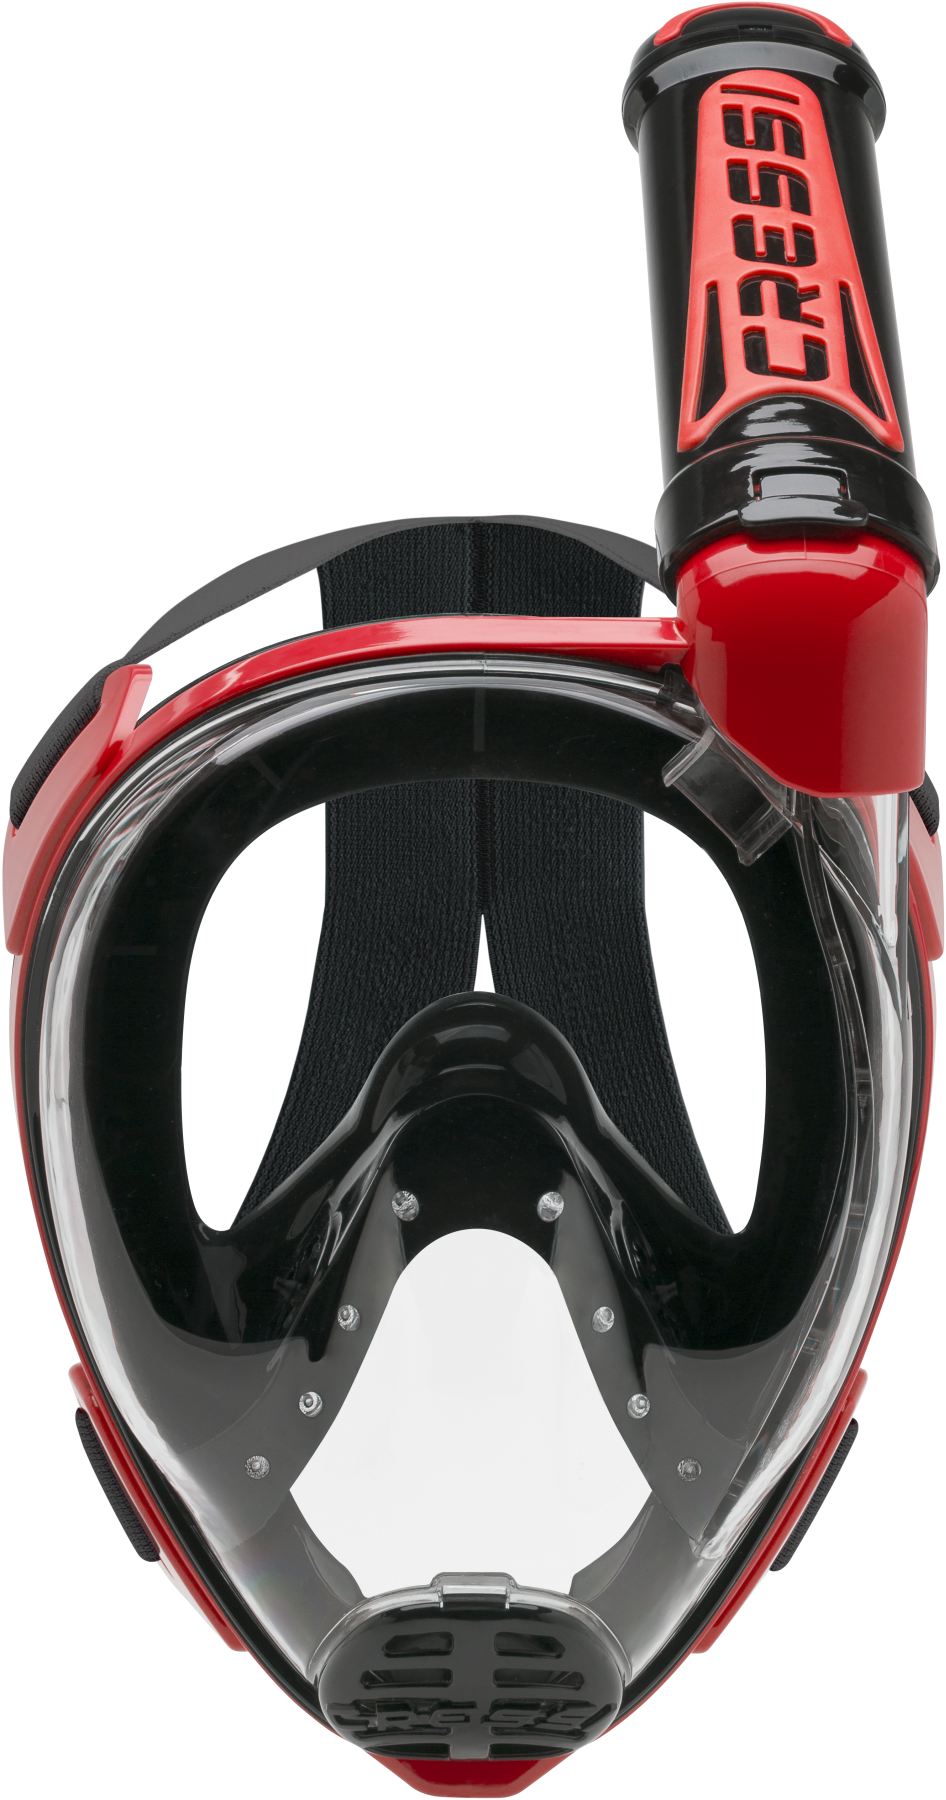 Full-face snorkelling mask